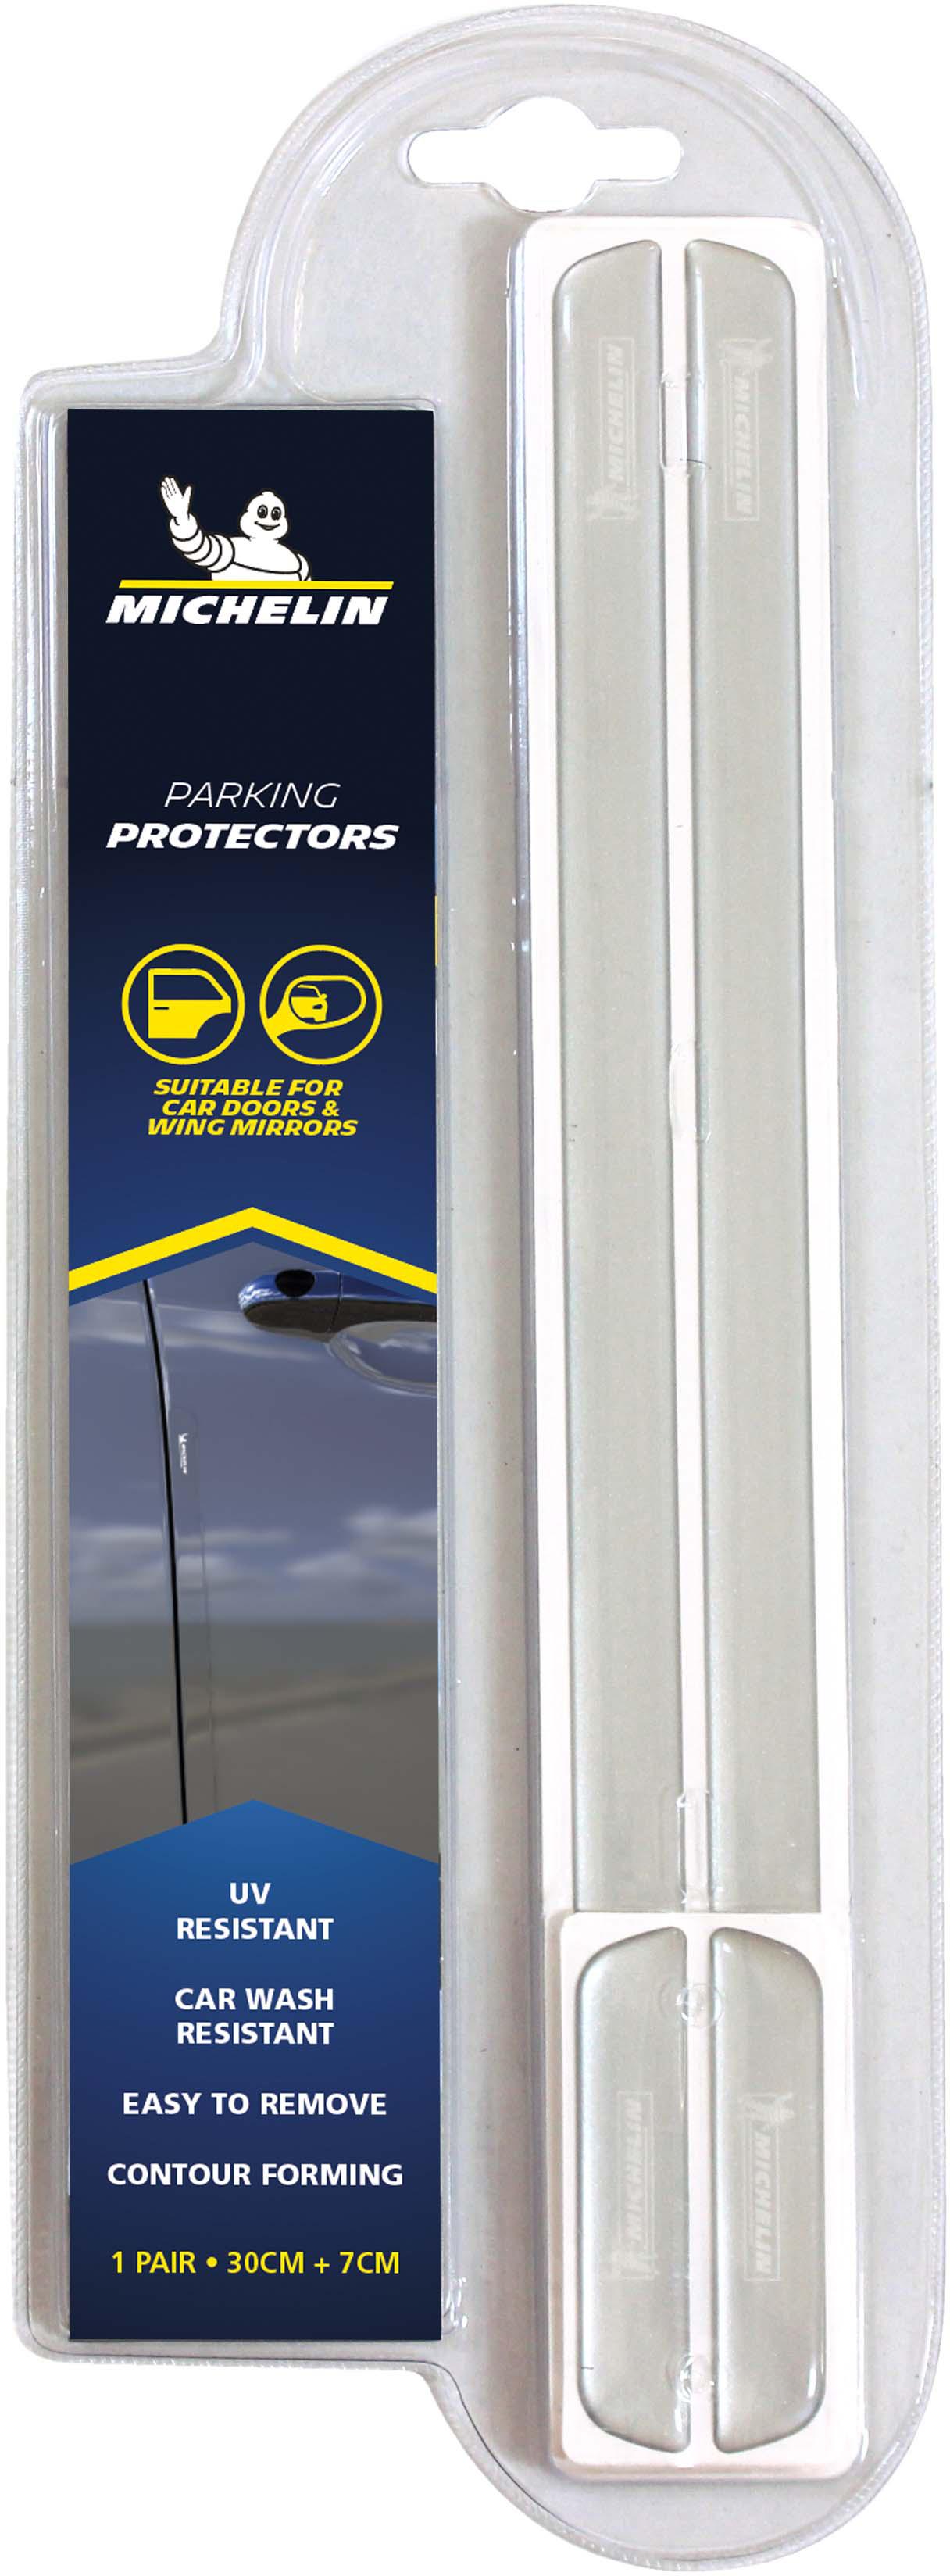 Michelin Parking Protectors Door And Wing Mirror Reflective Silver